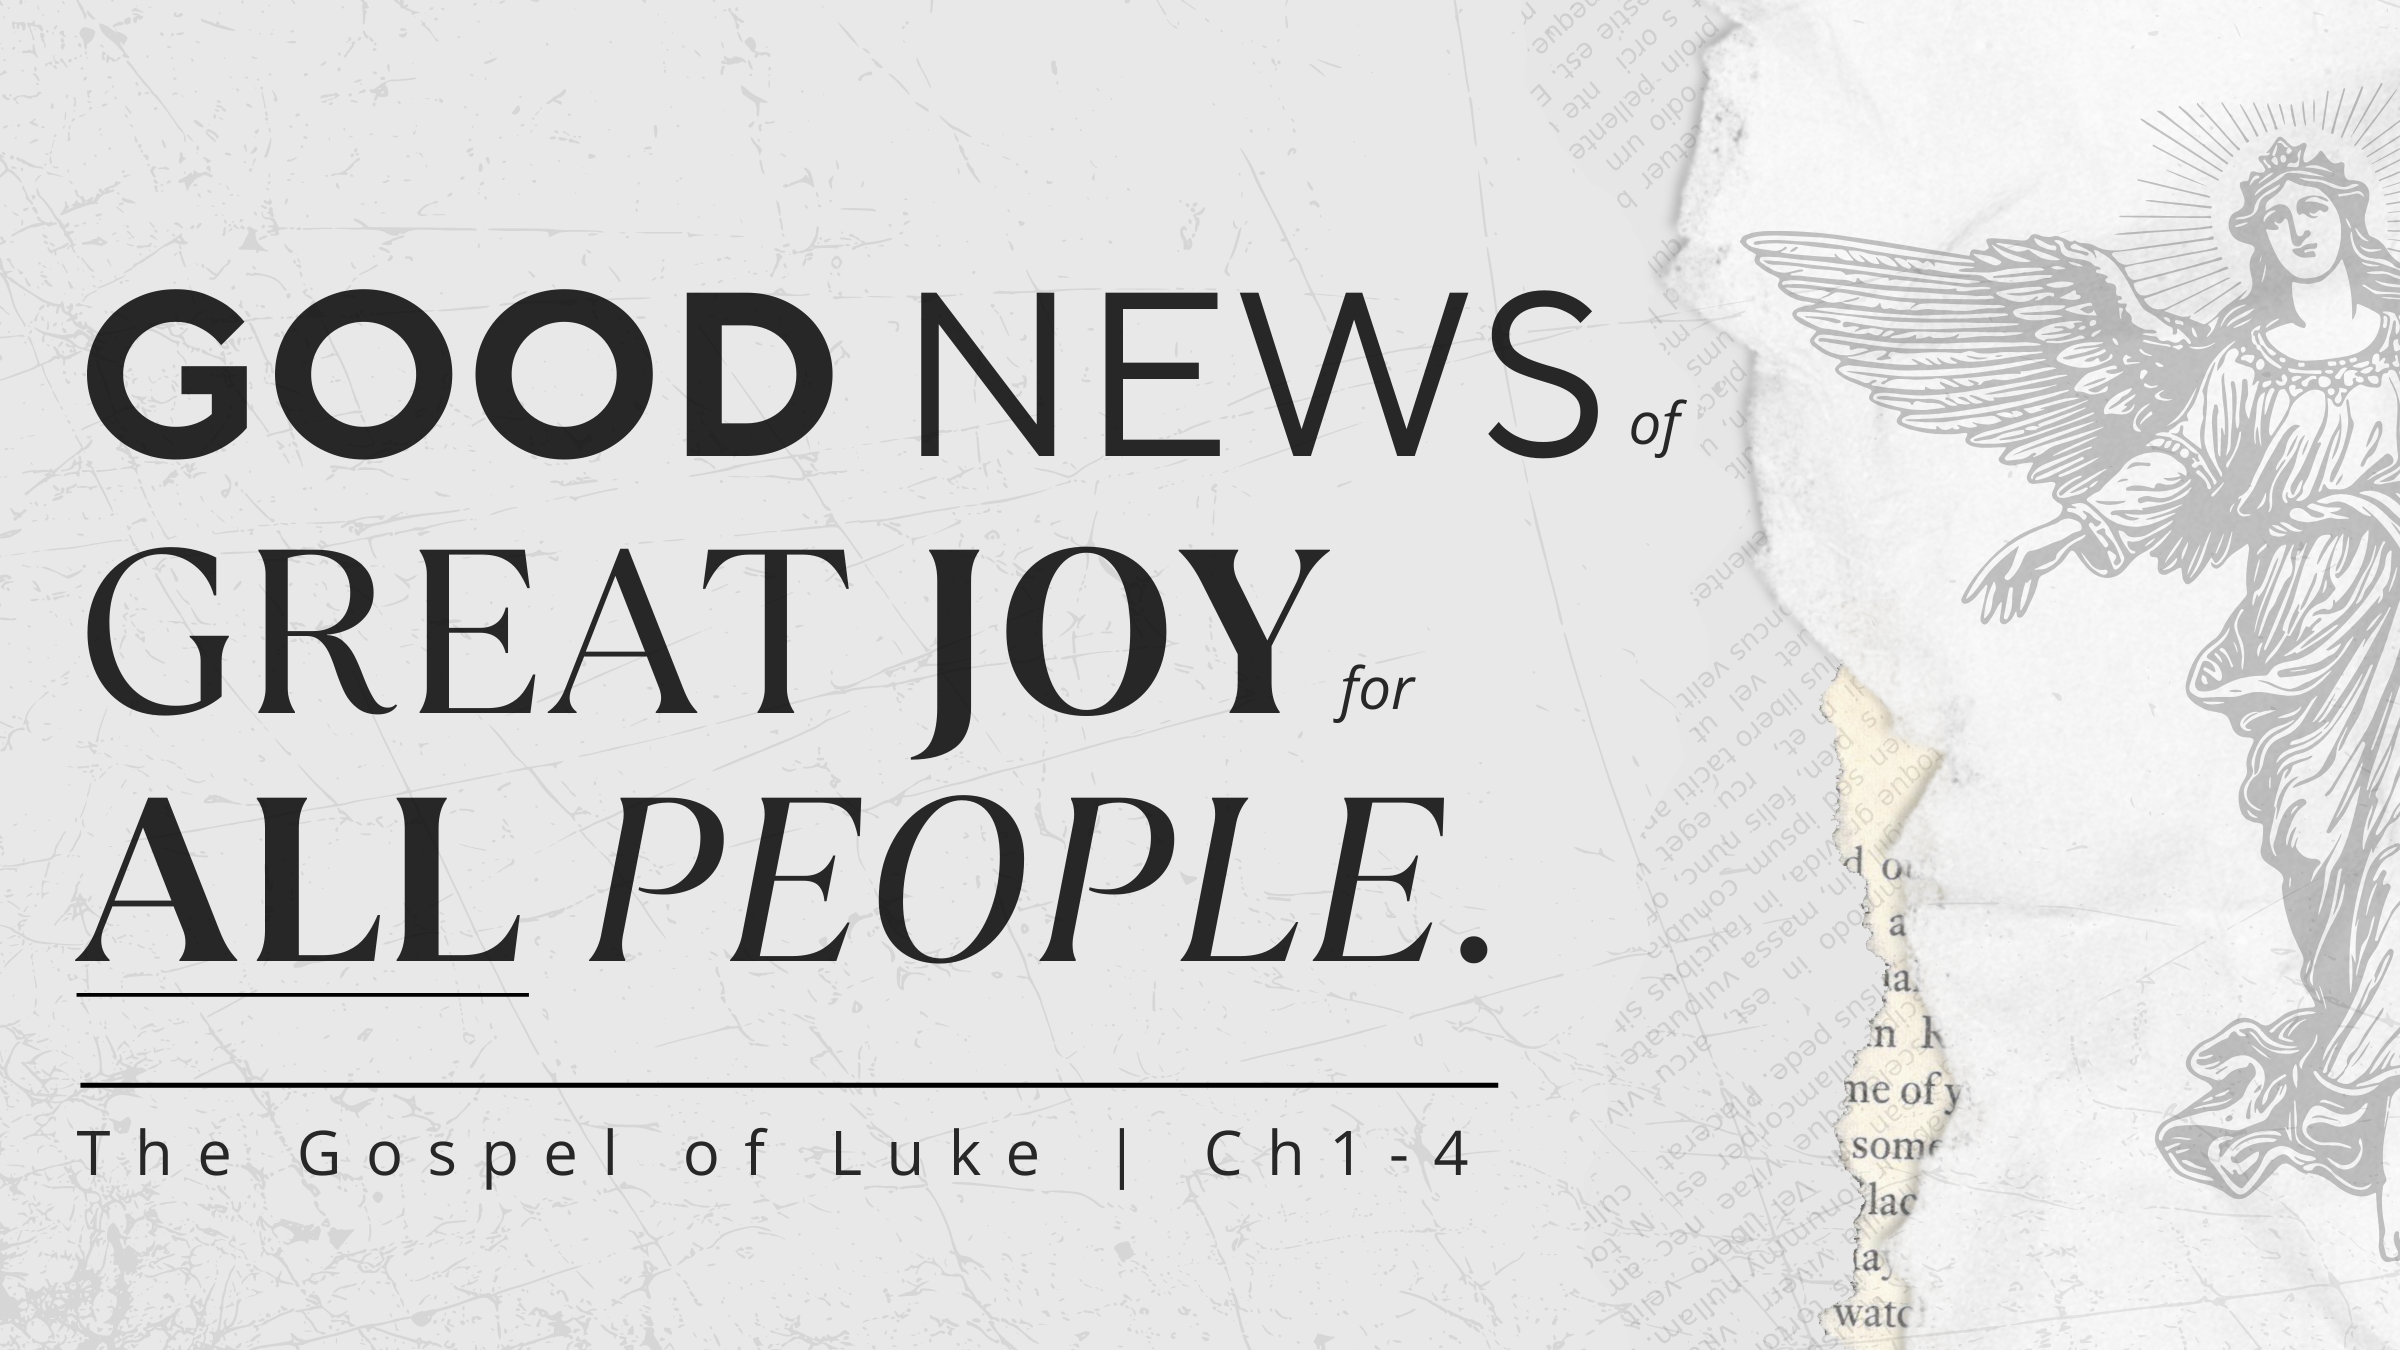 Luke Ch1-4: Good News of Great Joy for All People